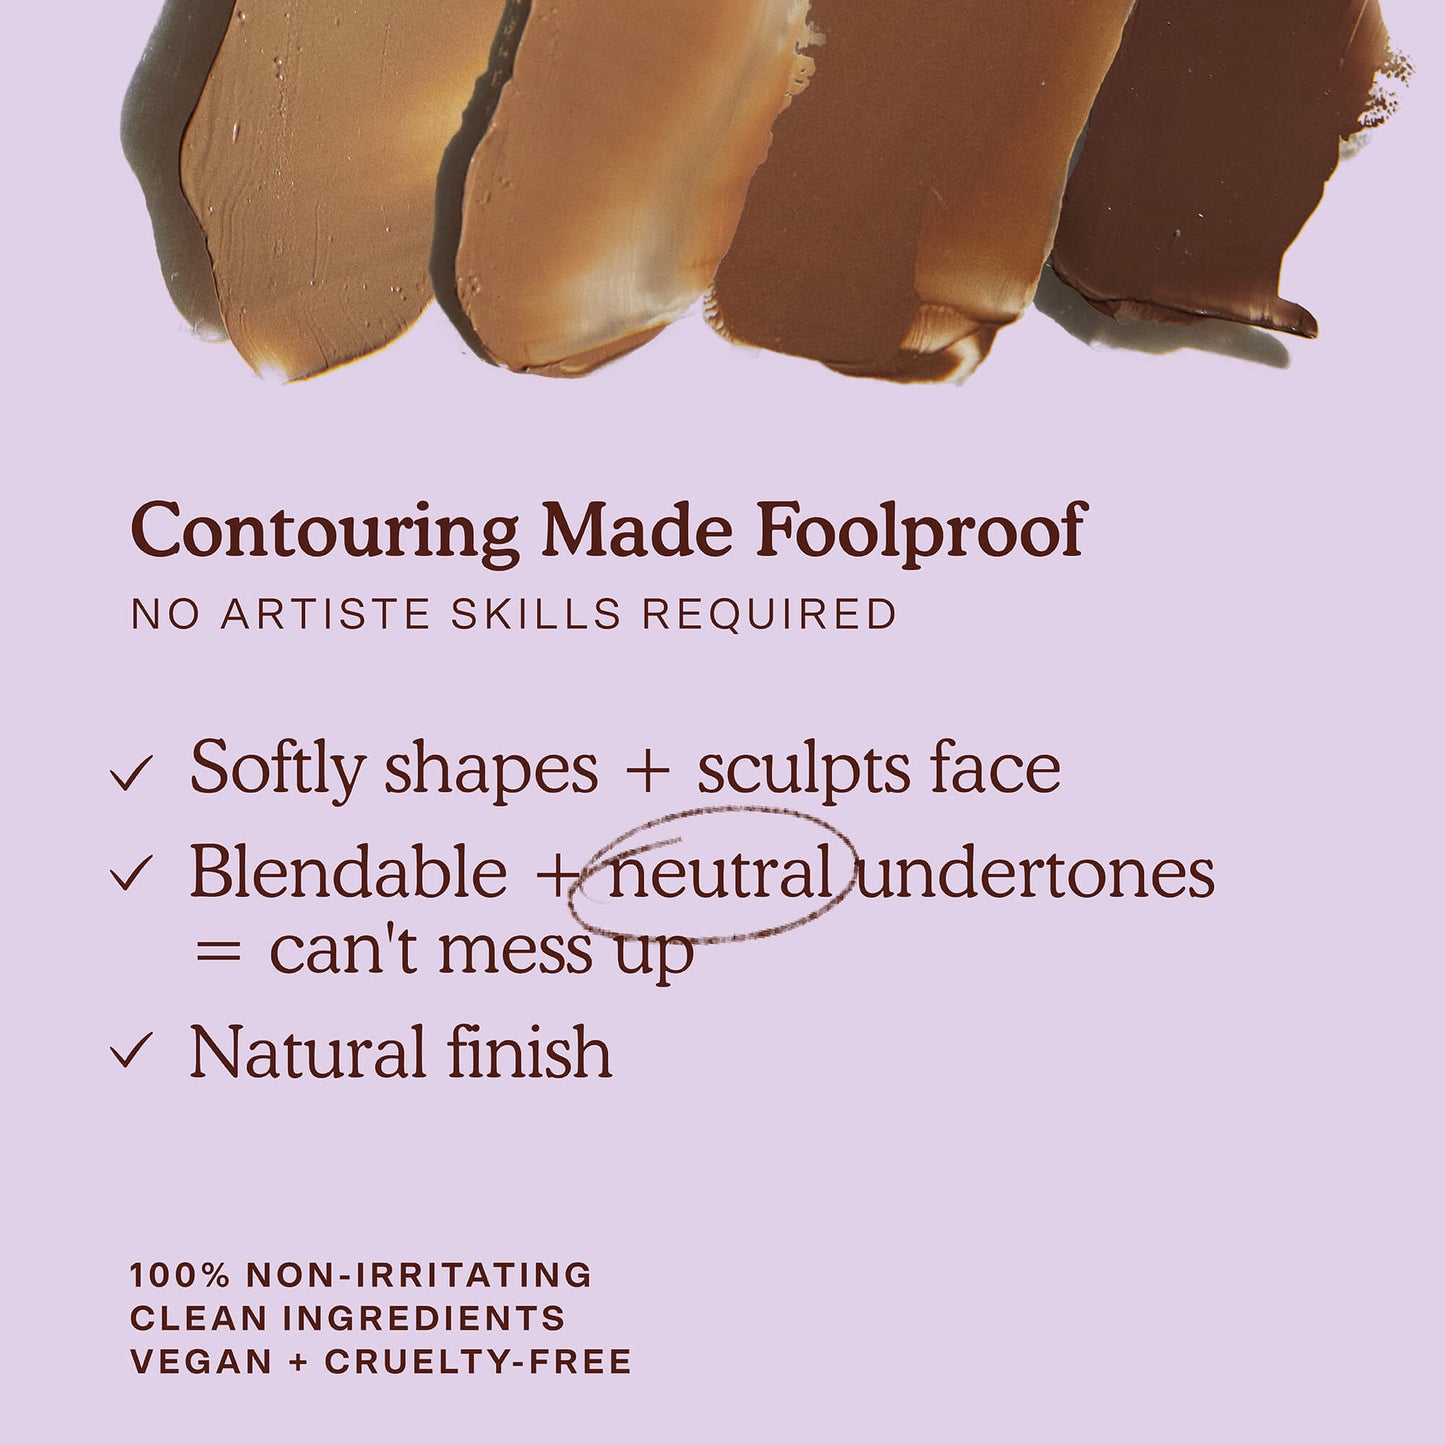 [Shared: Tower 28 Beauty Sculptino™ Cream Contour is contouring made foolproof. No artiste skills required. It softly shapes and sculpts the face. It's blendable and has neutral undertones, so you can't mess up. Plus it has a natural finish. It's also made with 100% non-irritating clean ingredients and also vegan + cruelty free]